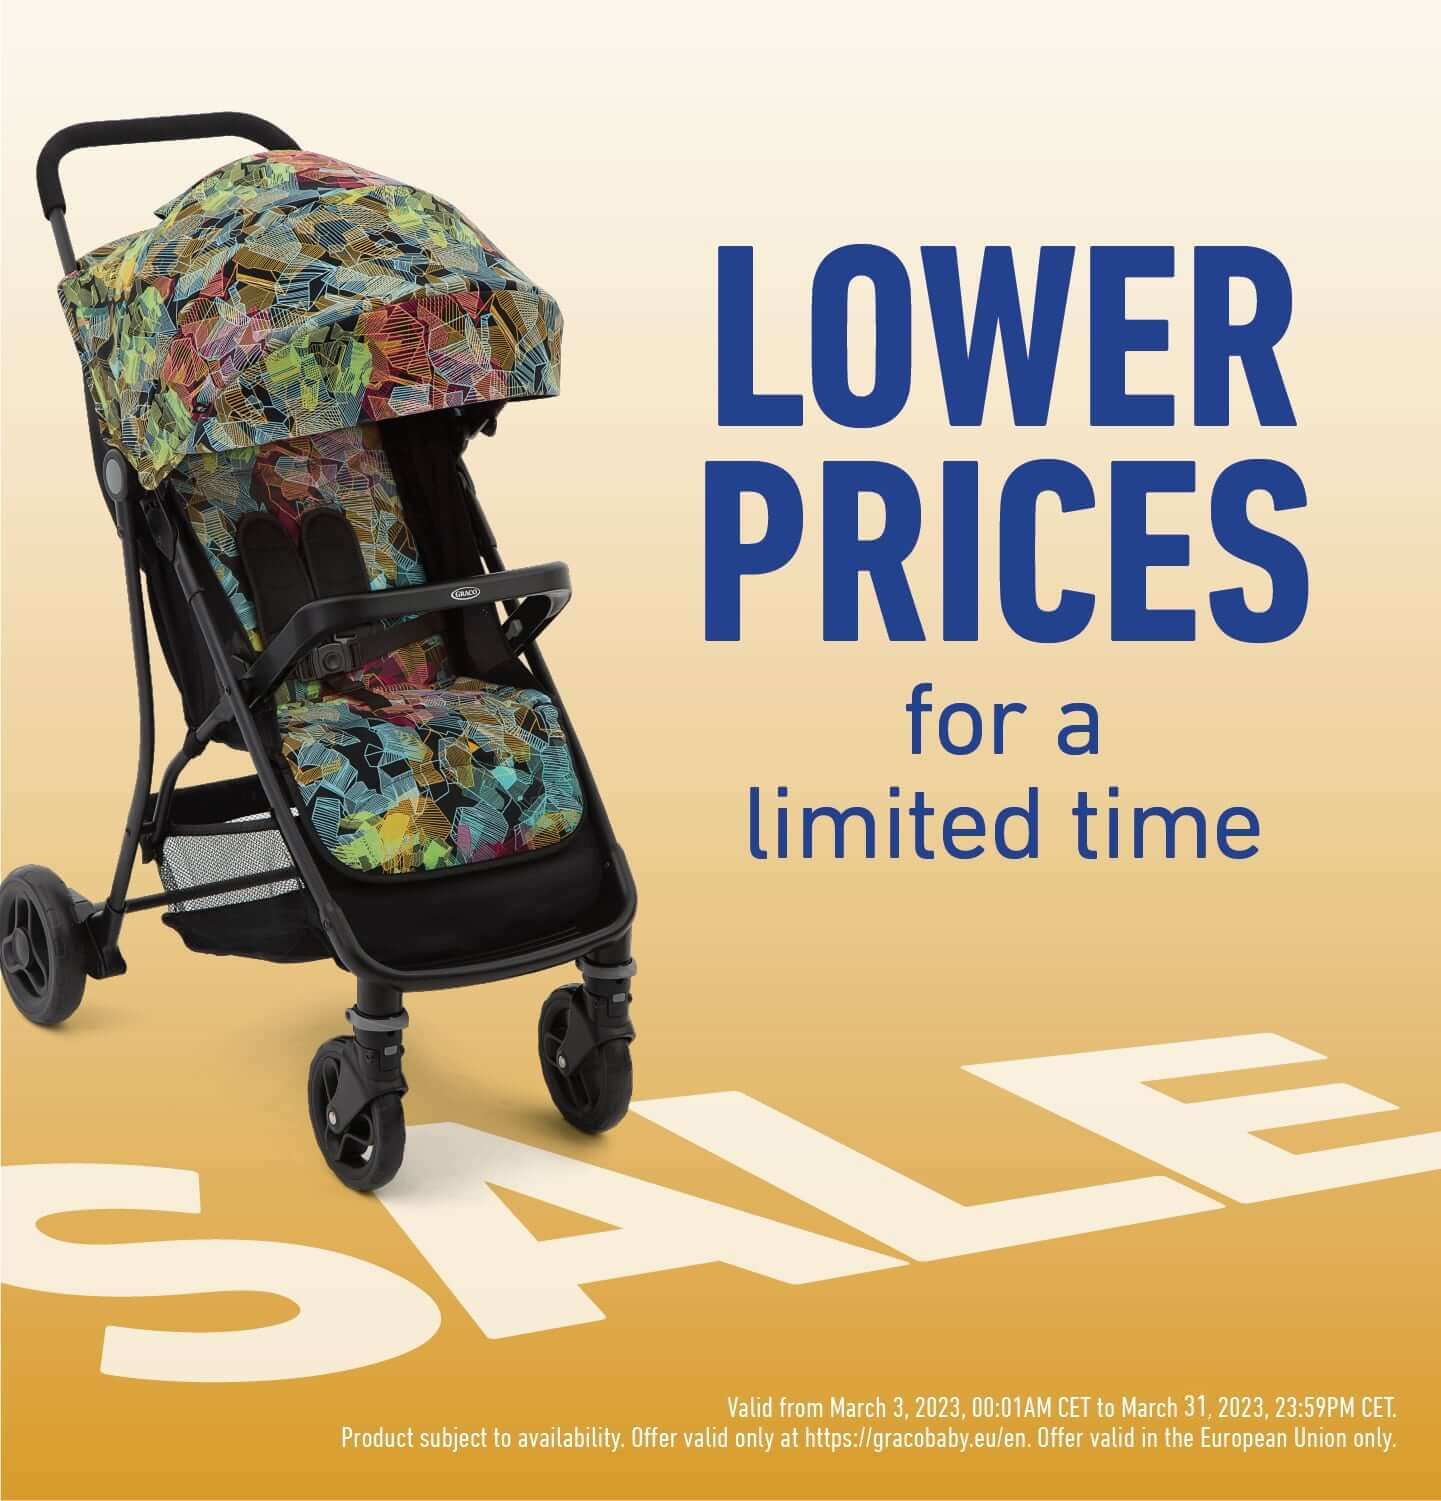 Graco Breaze Lite 2 stroller in kaleidoscope in front of text that states sale and lower prices for a limited time